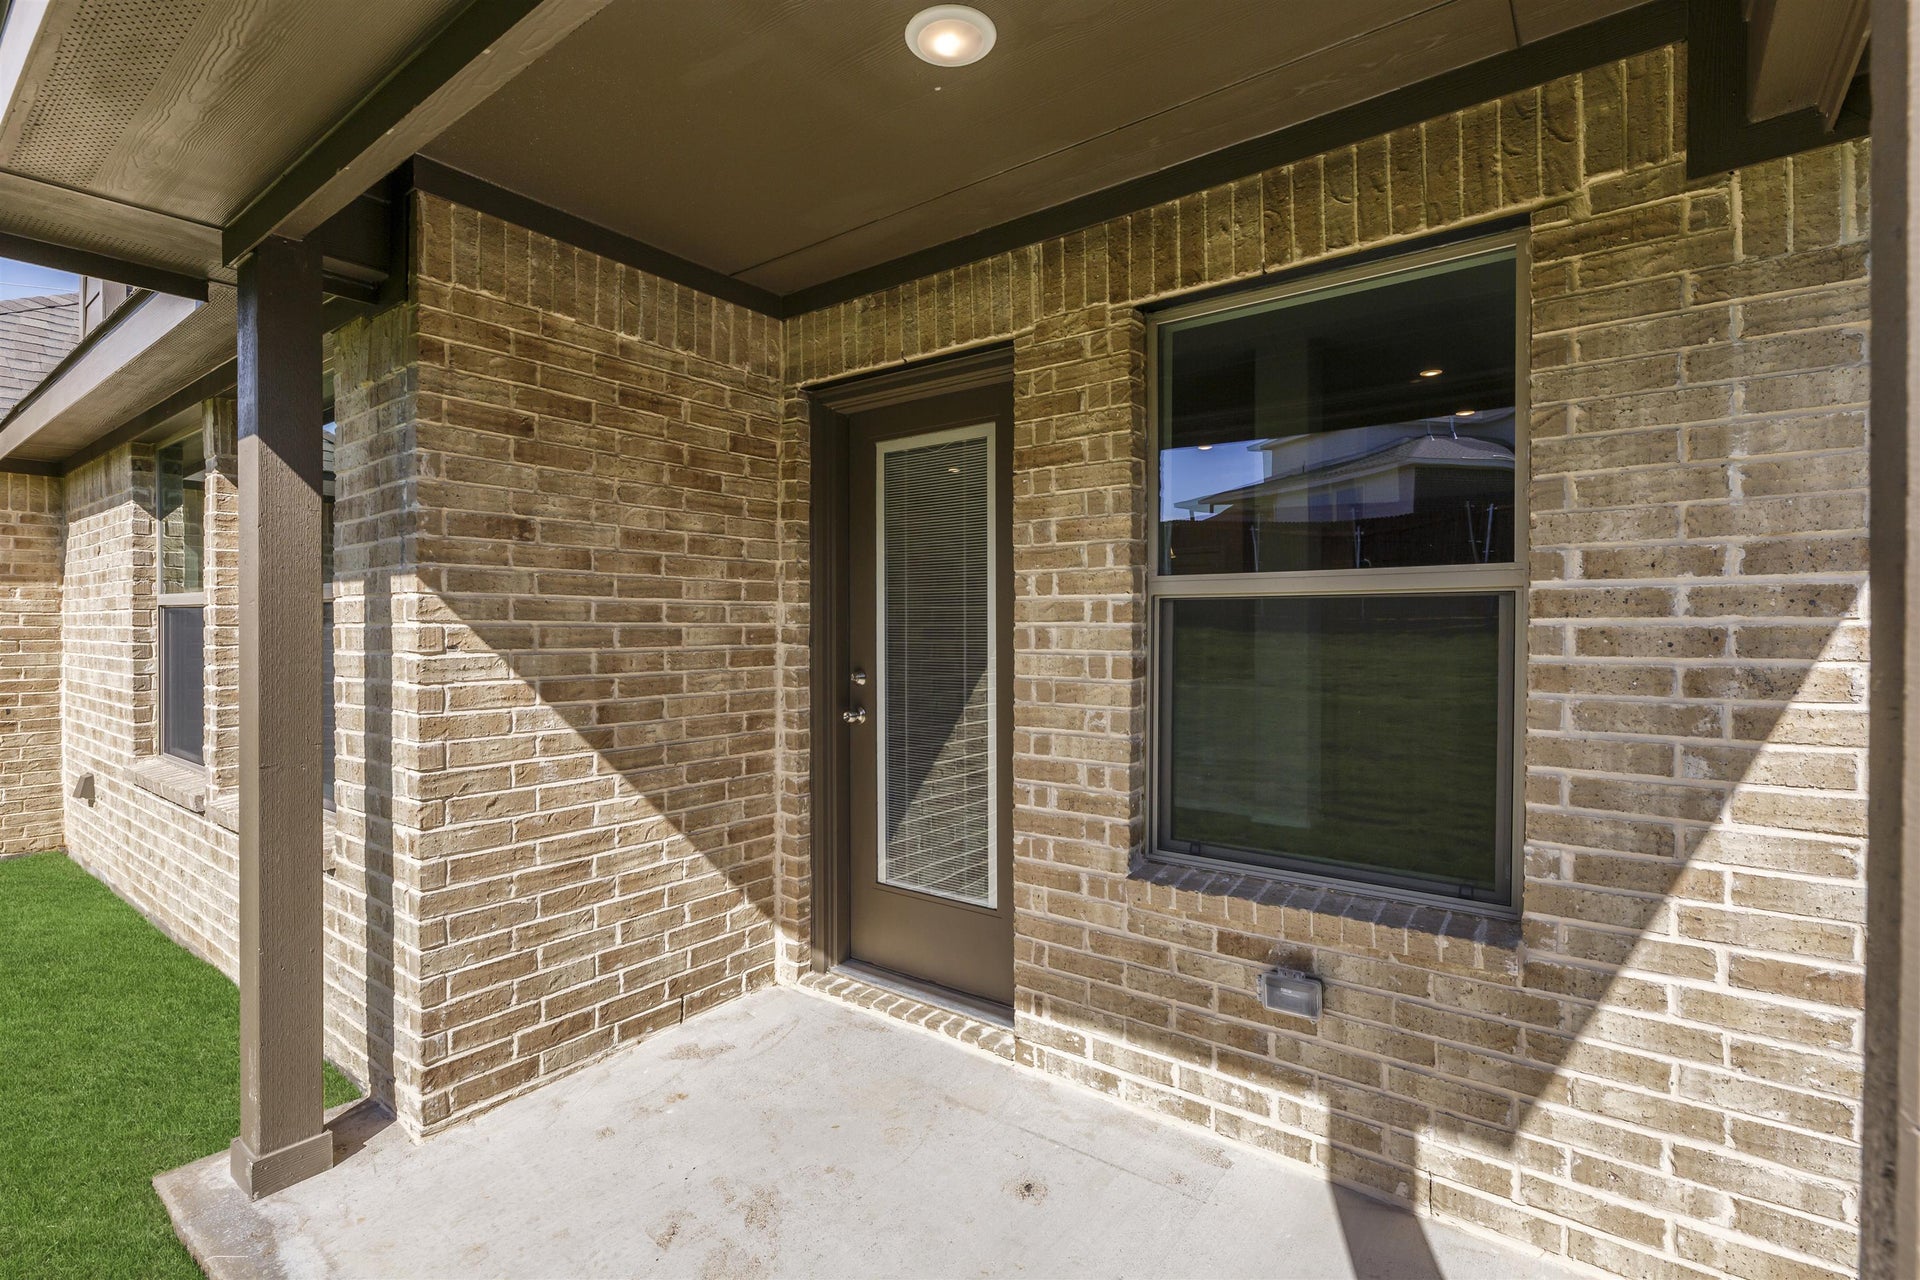 3br New Home in Weatherford, TX